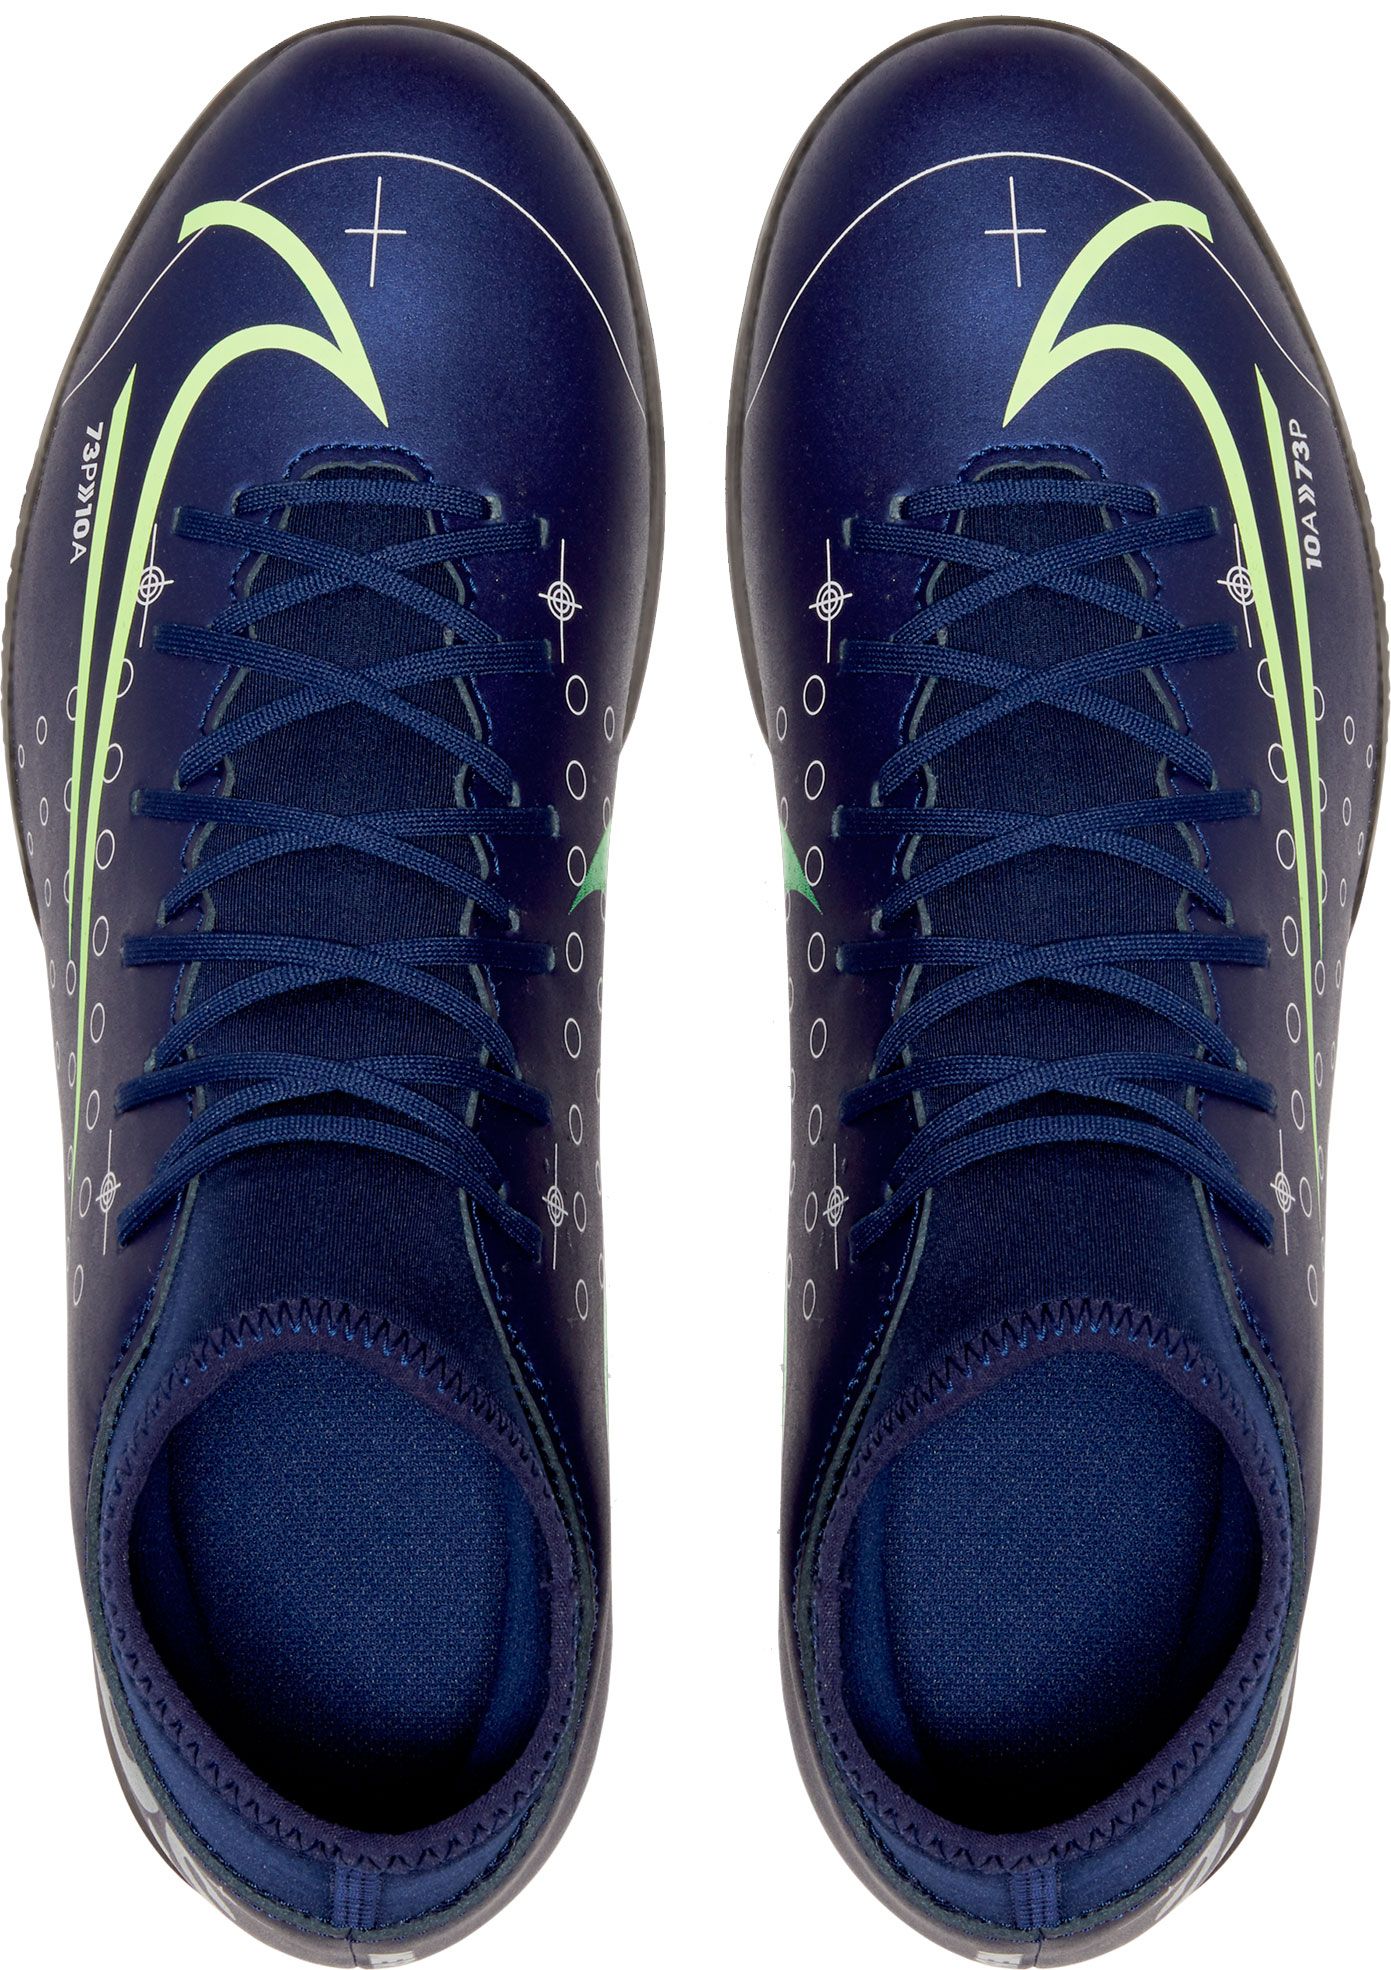 Nike Mercurial Superfly 7 Club MDS Turf Soccer Cleats.